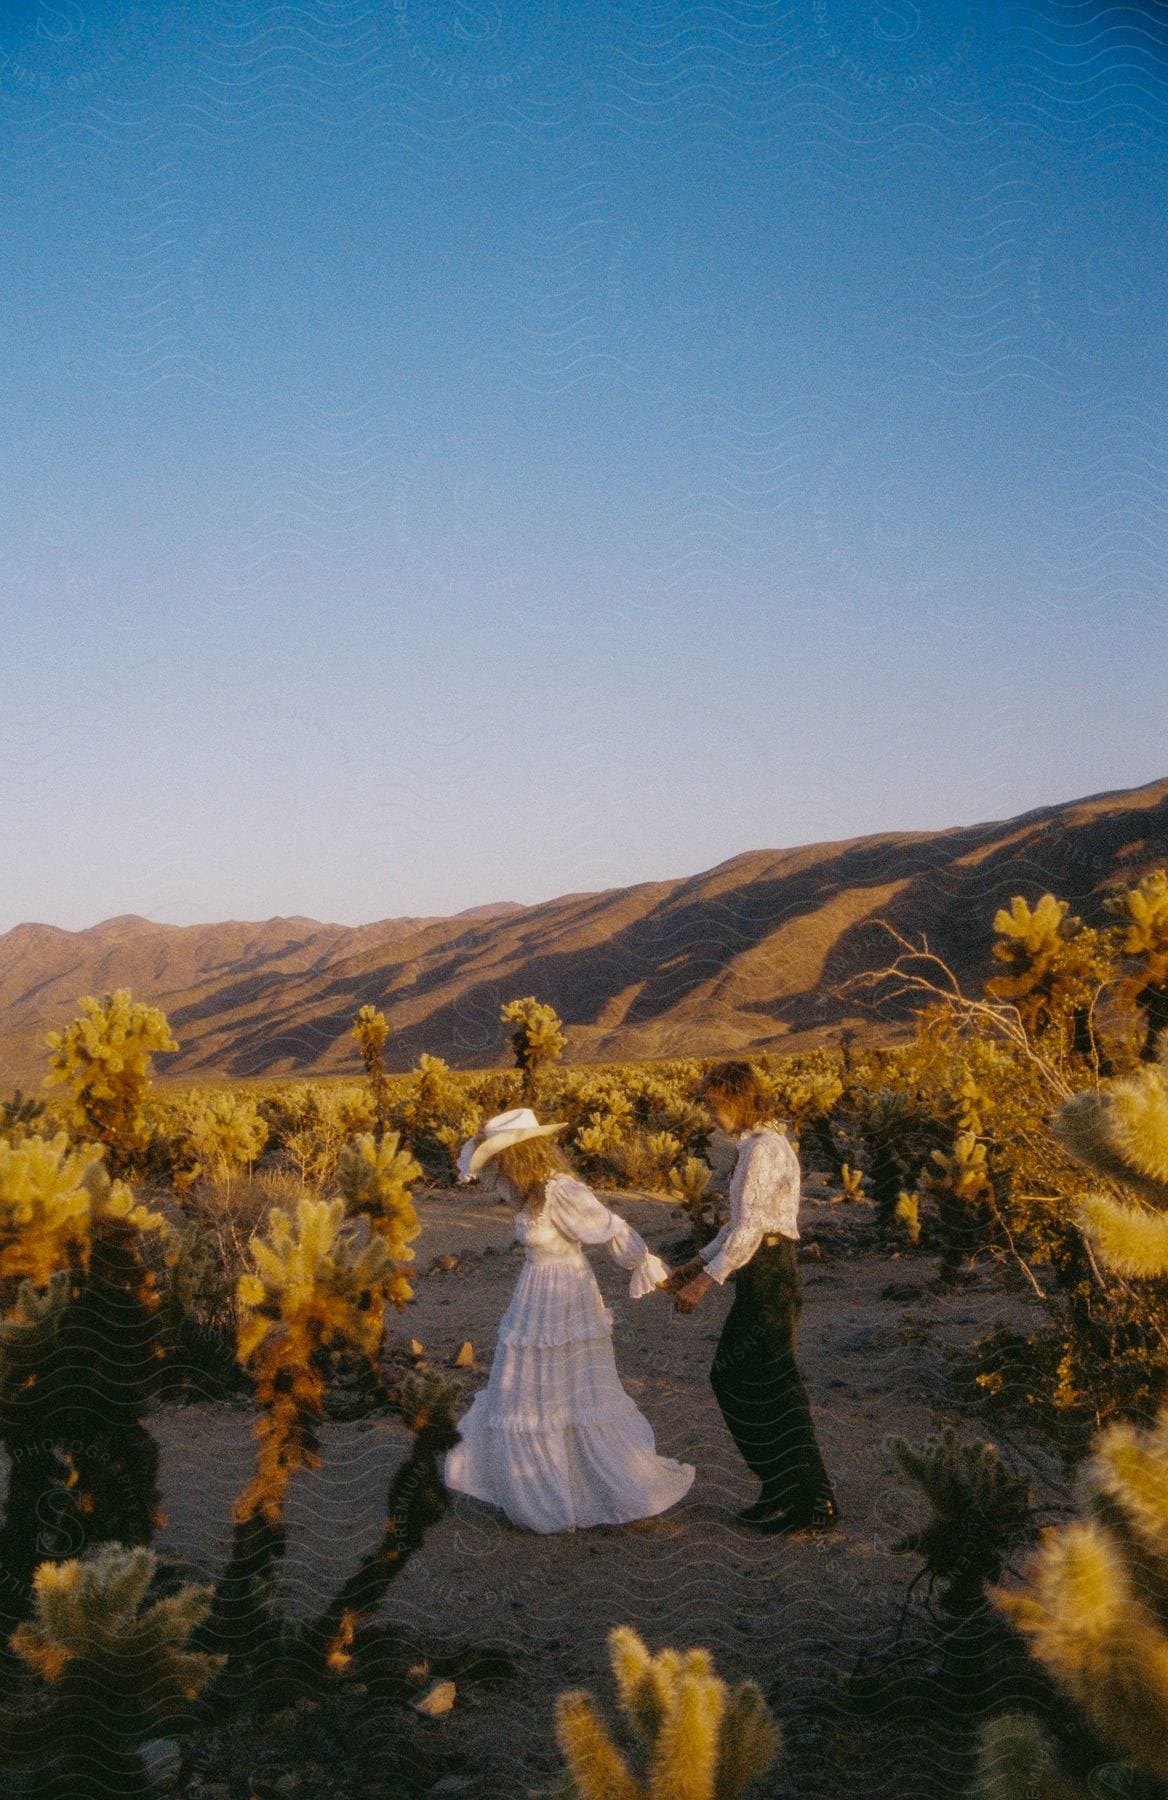 man and woman hold hands standing in an outdoor garden at sunset